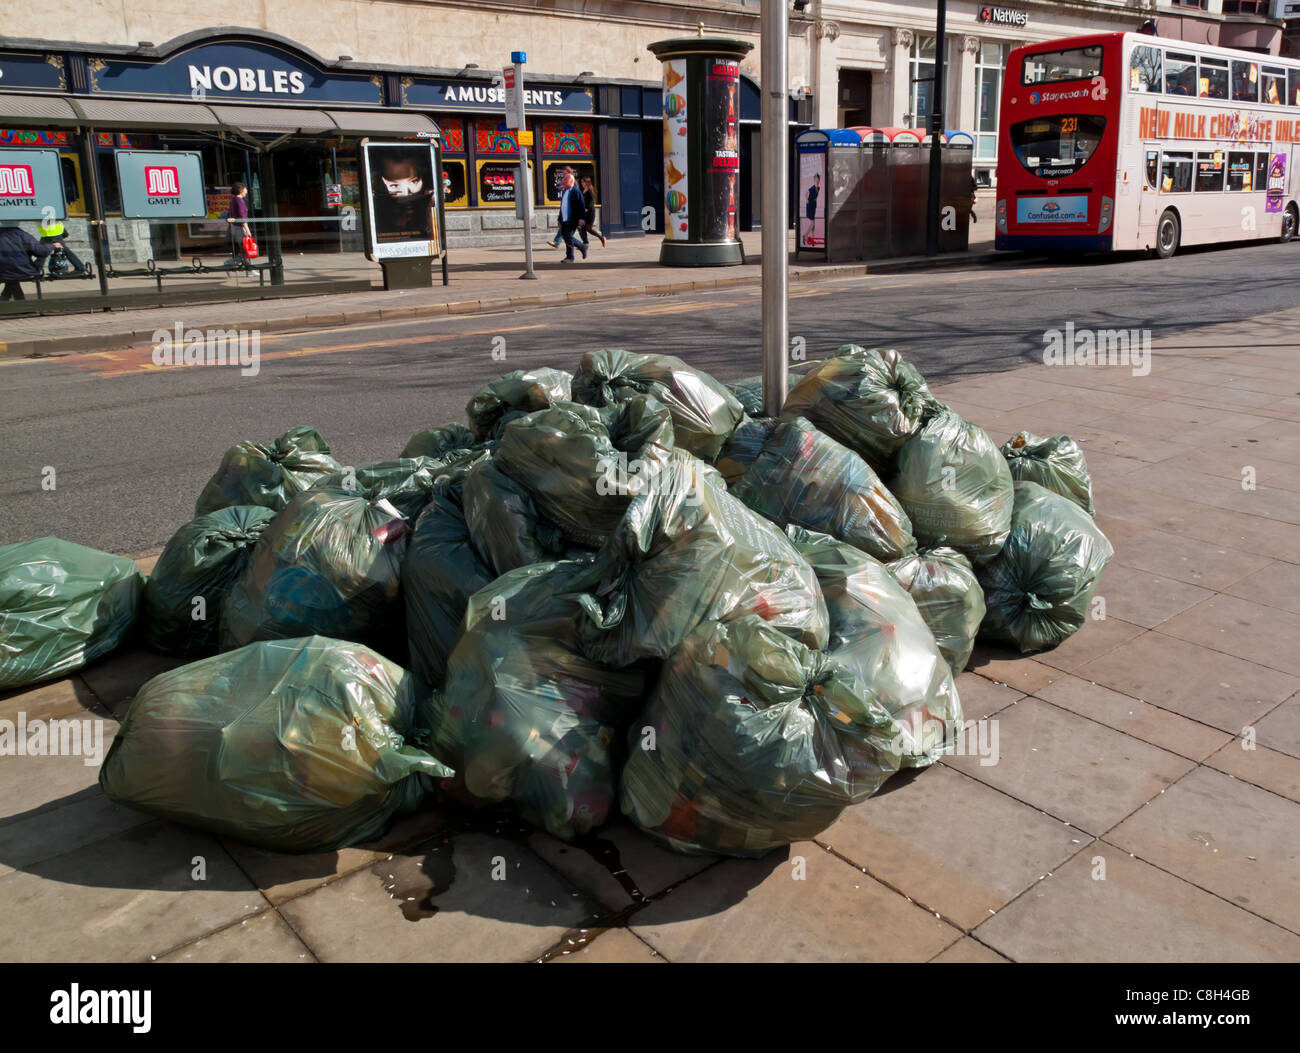 Three big blacks trash bags in front of wall Stock Photo - Alamy